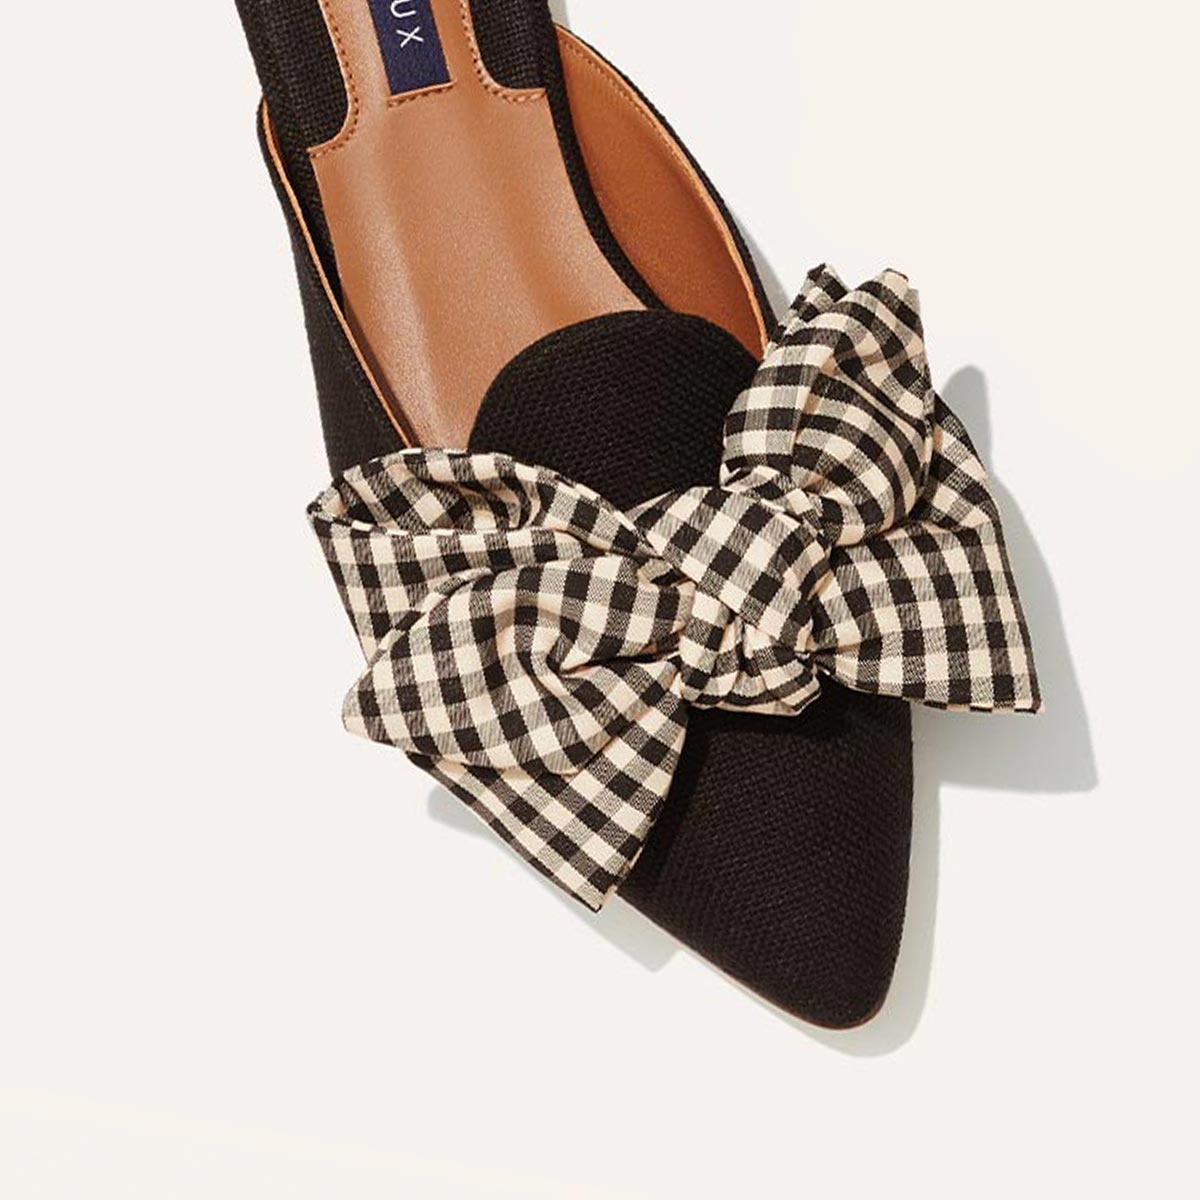 The Mule - Tan and Black Gingham